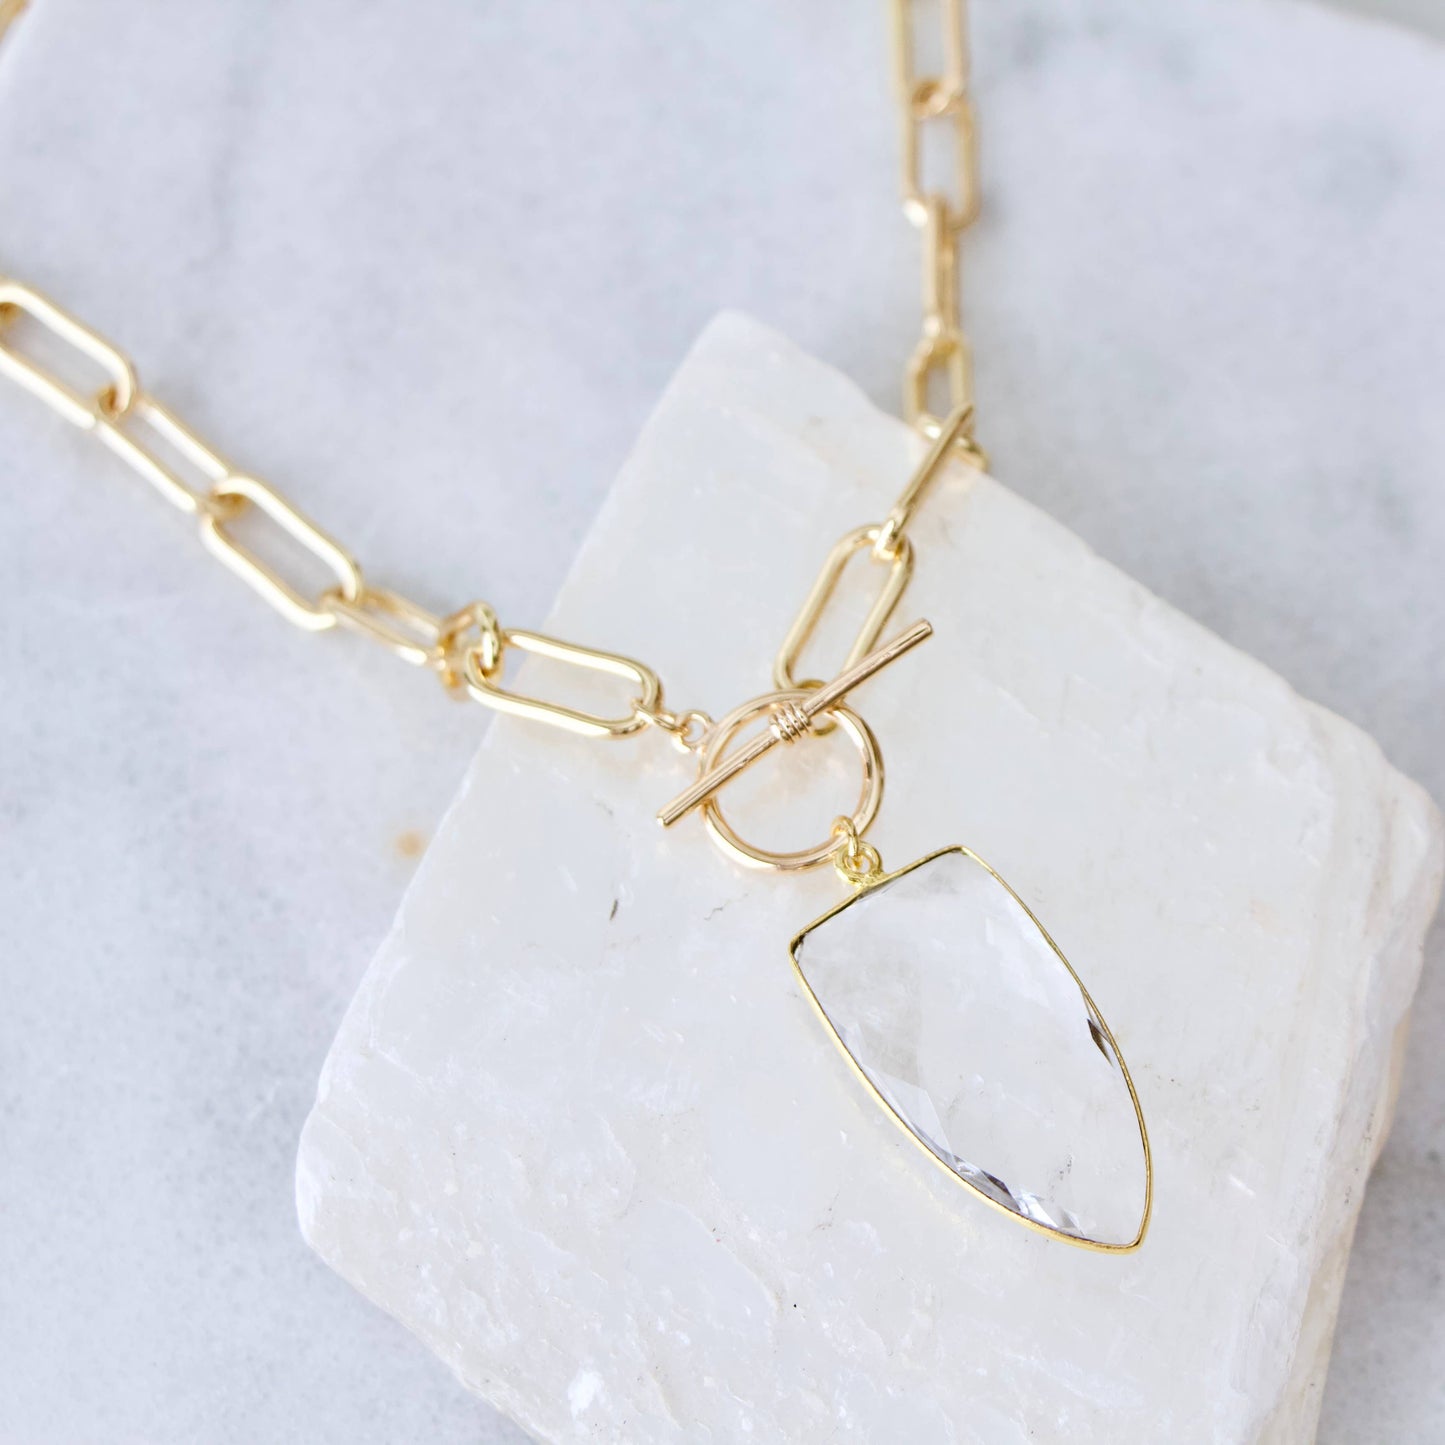 Quartz Toggle Paperclip Necklace from Southern Sunday